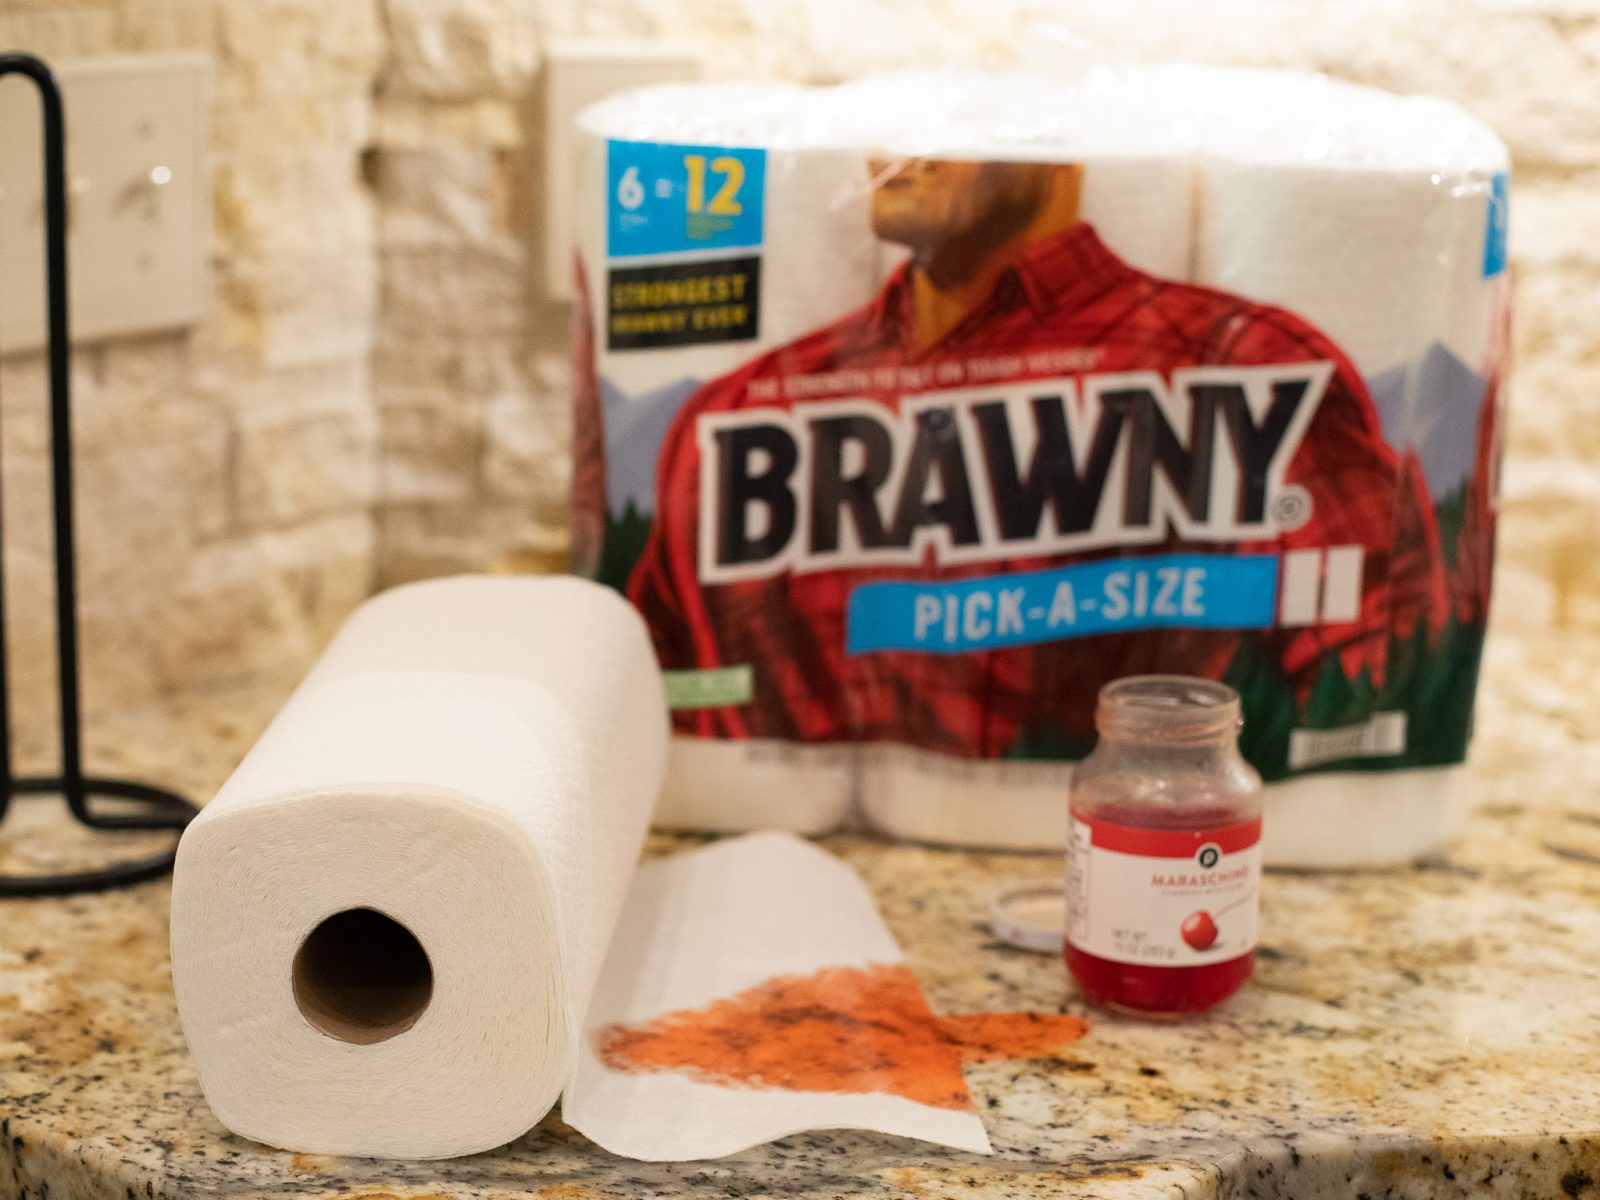 Brawny Paper Towels As Low As $4.74 At Publix (Regular Price $14.69!)